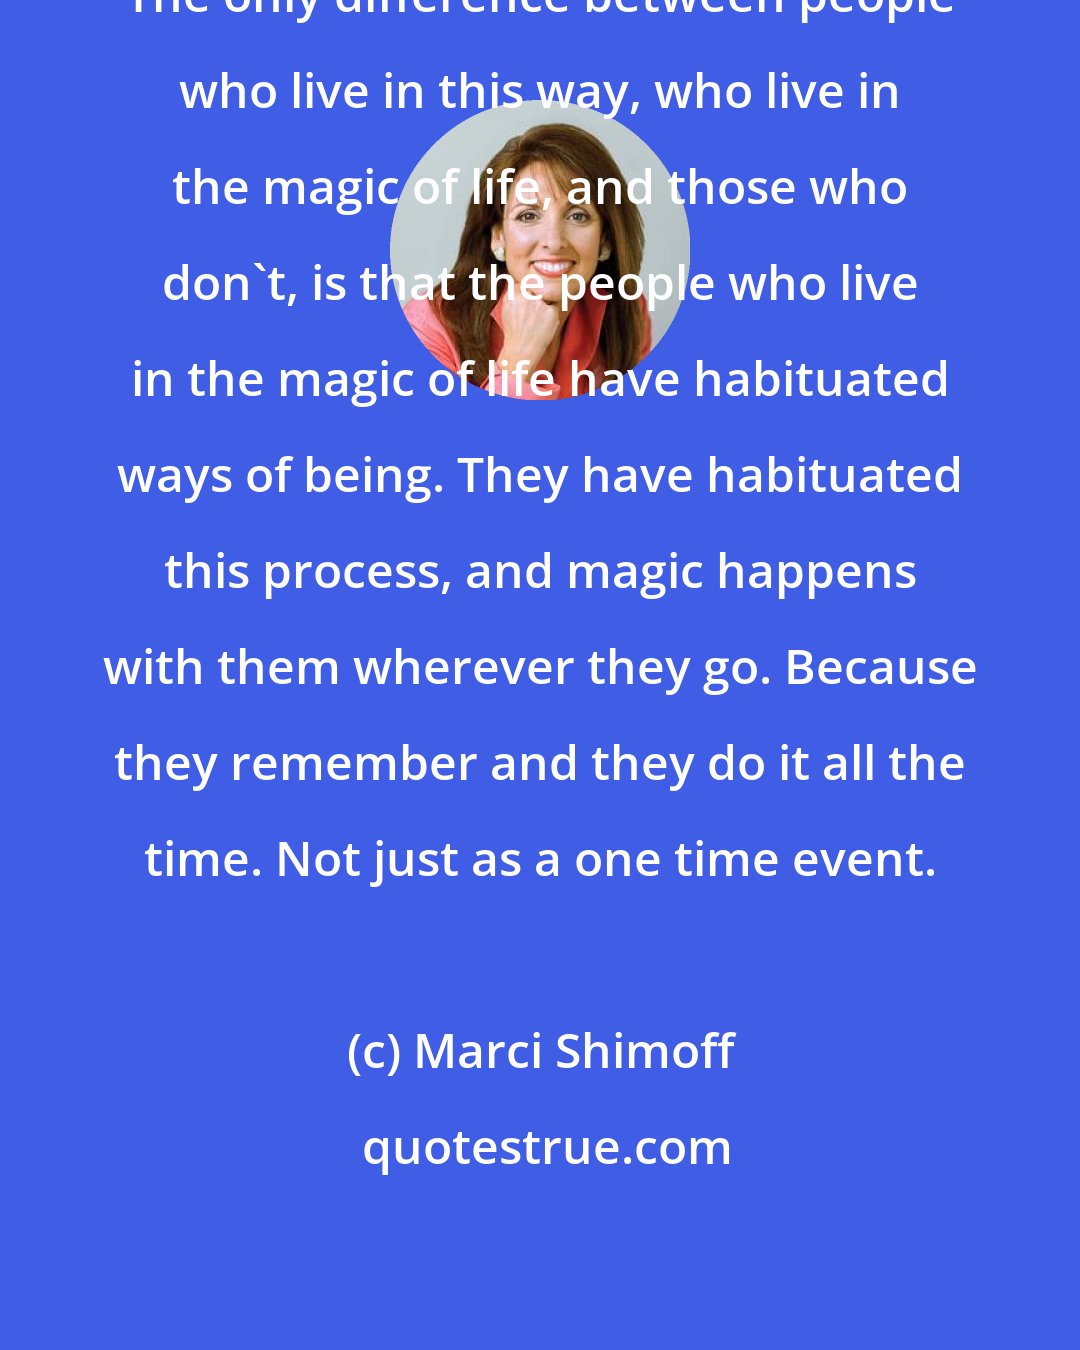 Marci Shimoff: The only difference between people who live in this way, who live in the magic of life, and those who don't, is that the people who live in the magic of life have habituated ways of being. They have habituated this process, and magic happens with them wherever they go. Because they remember and they do it all the time. Not just as a one time event.